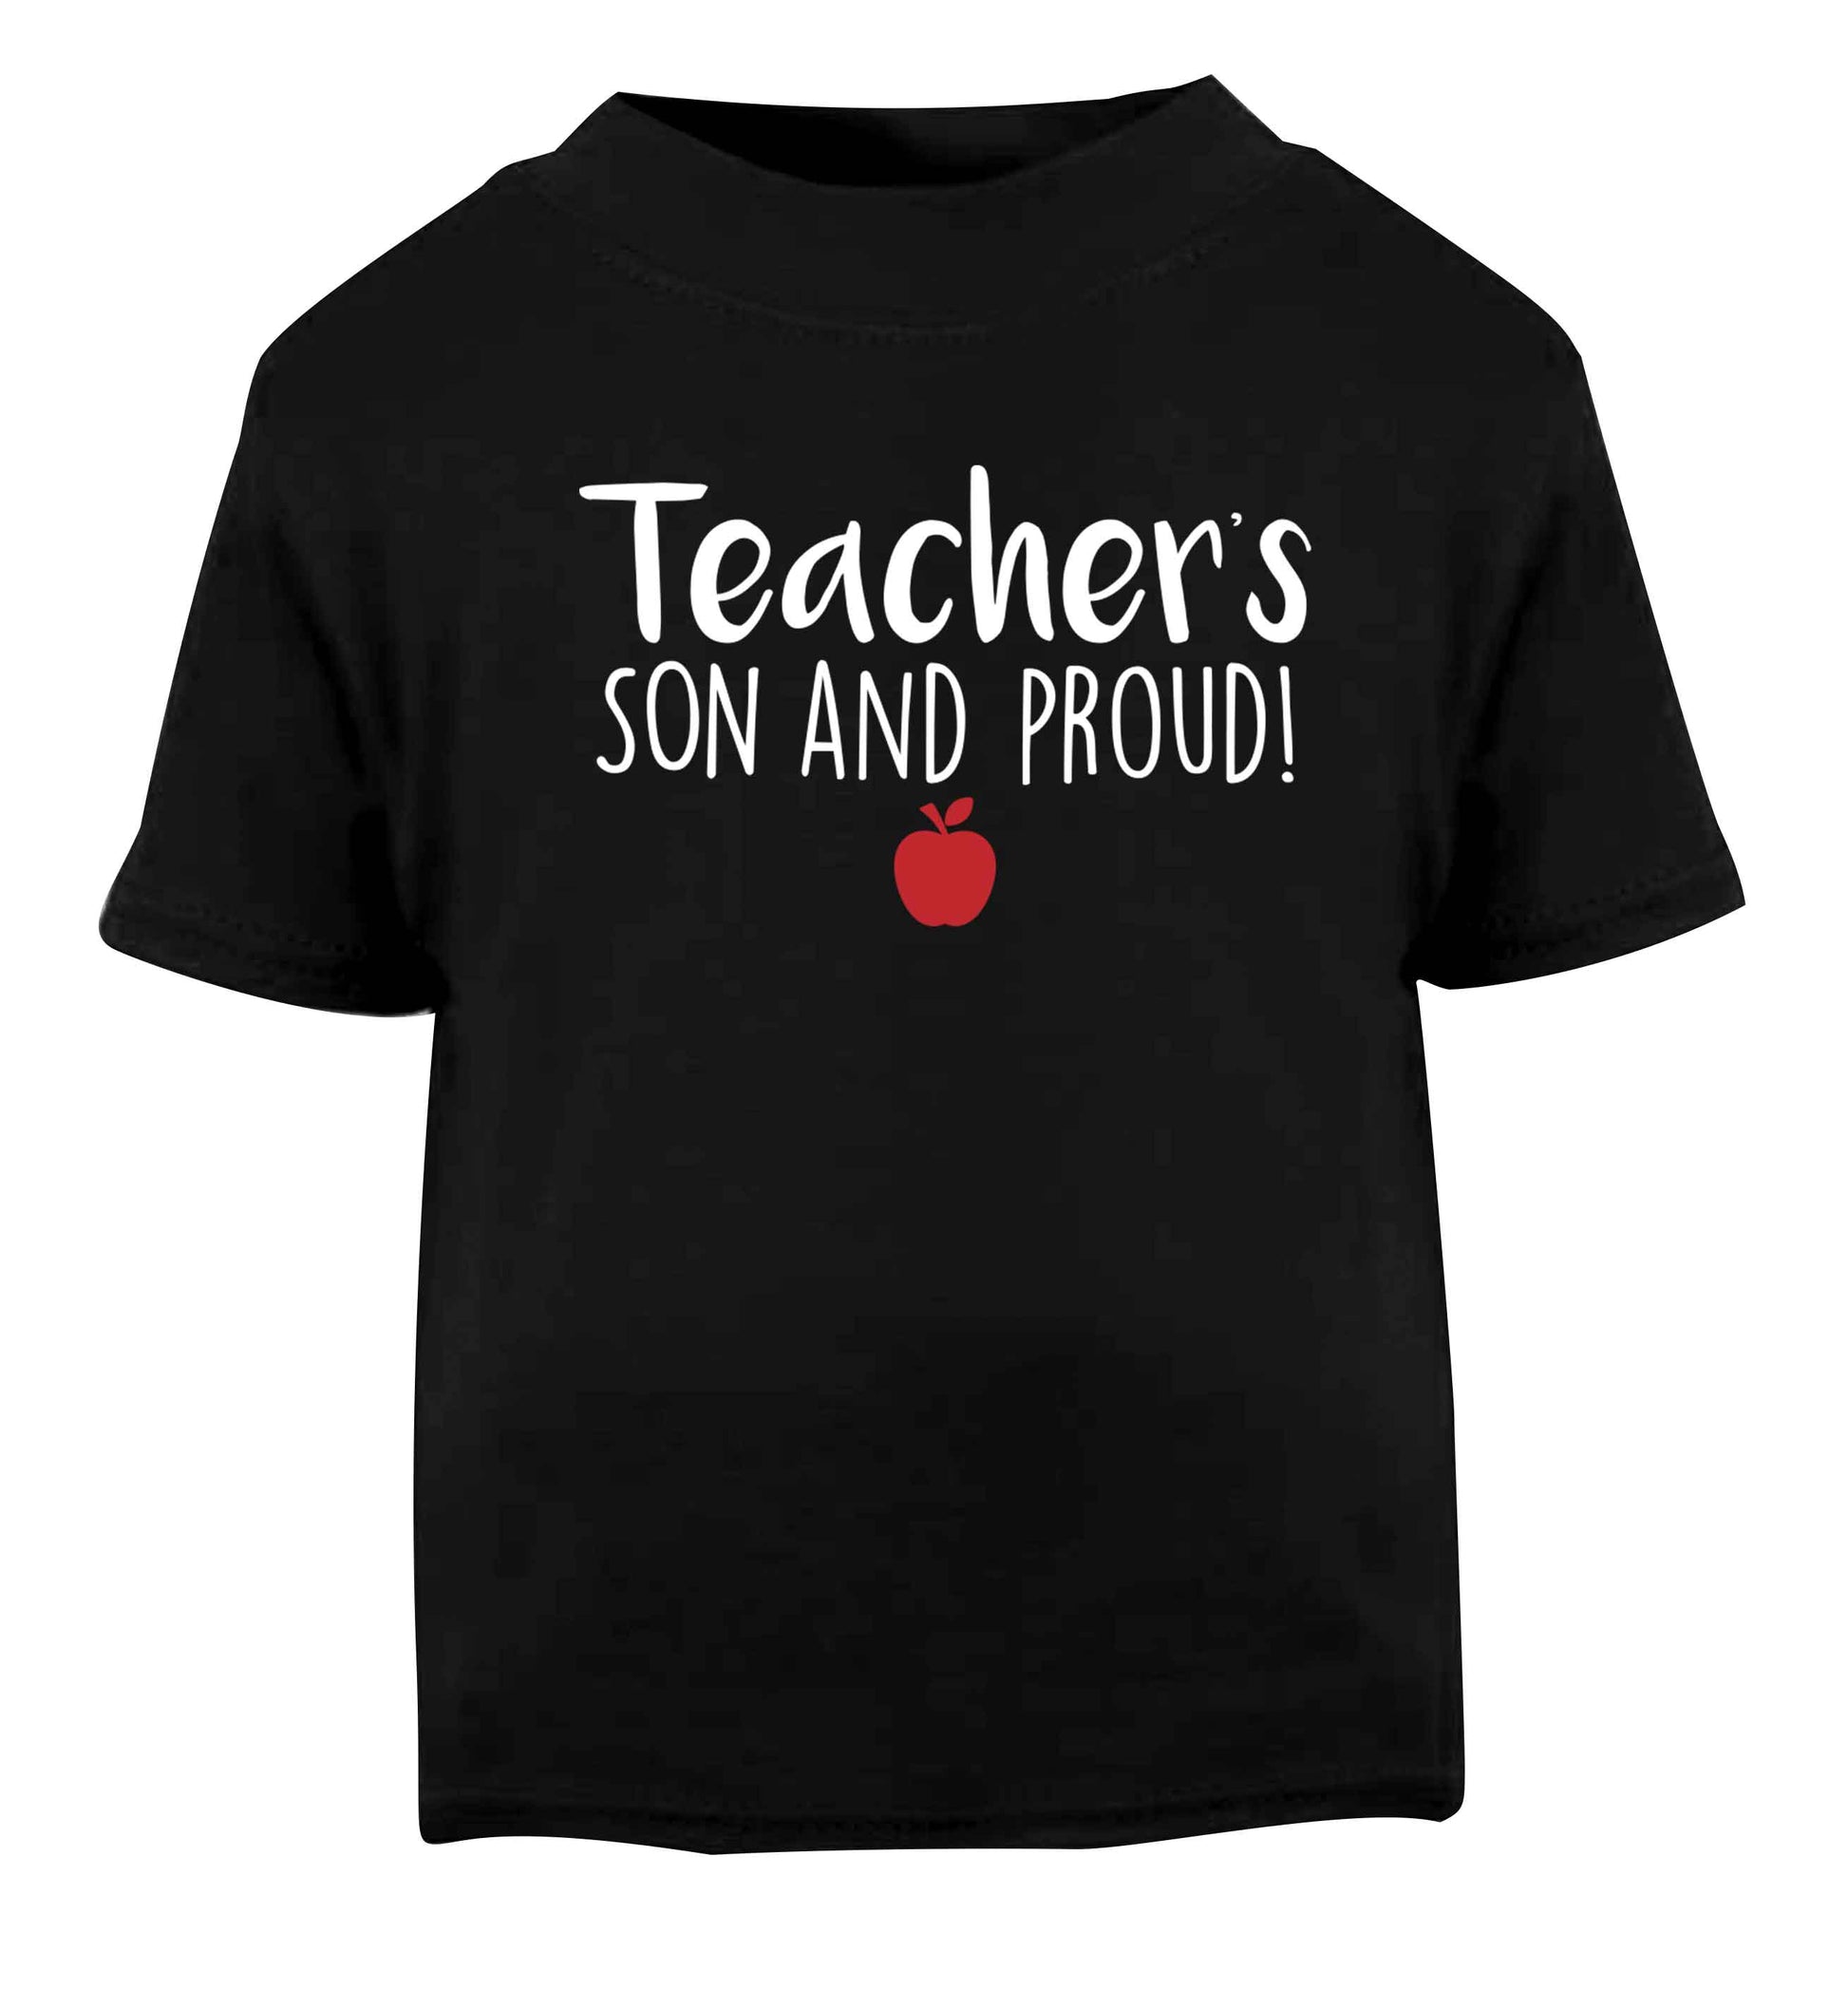 Teachers son and proud Black baby toddler Tshirt 2 years